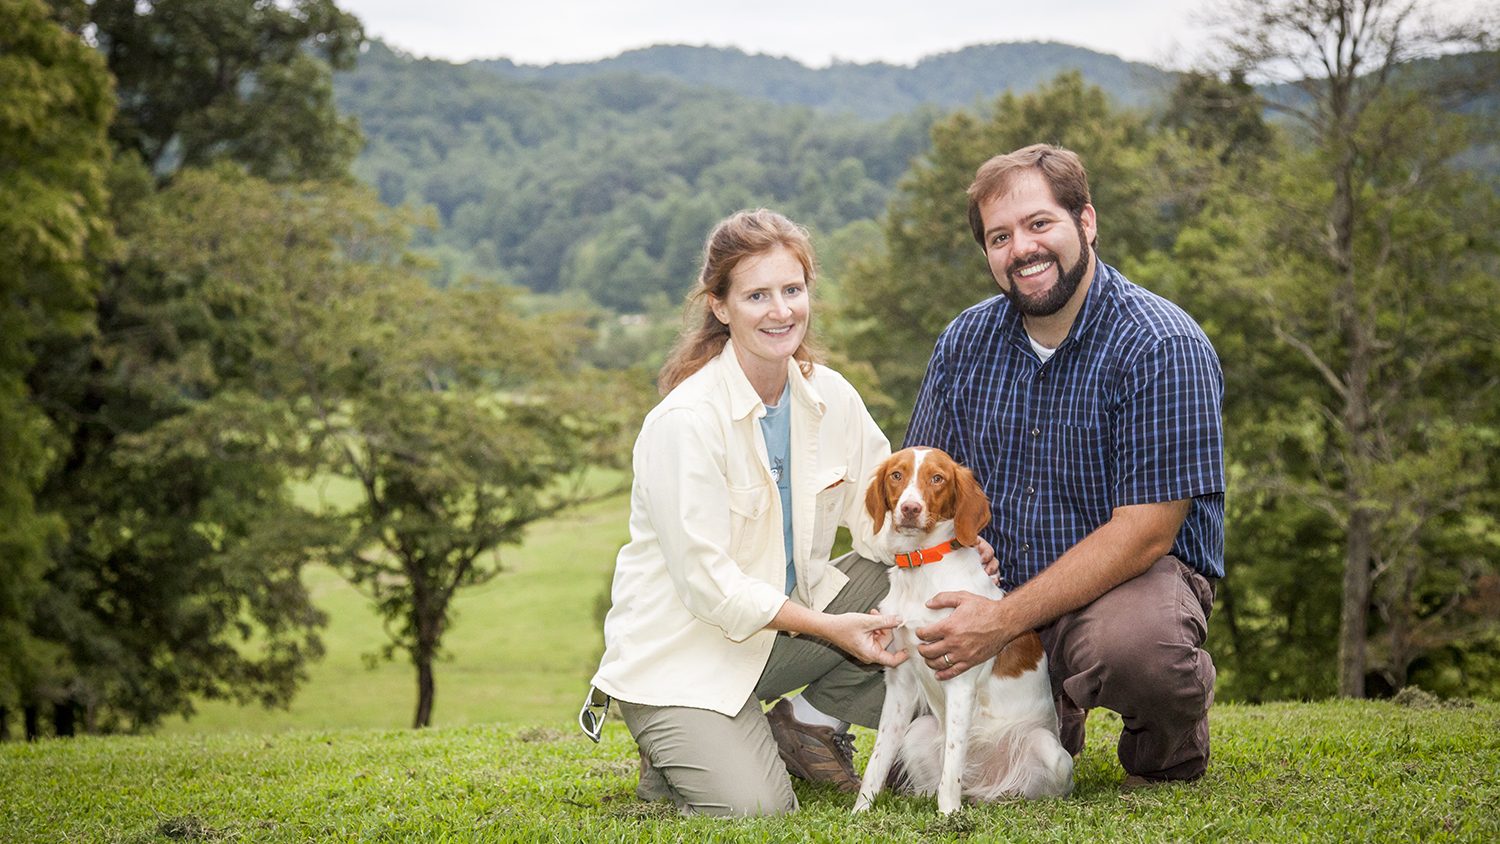 Brittany Whitmire and Andy von Canon with their dog on their farm.